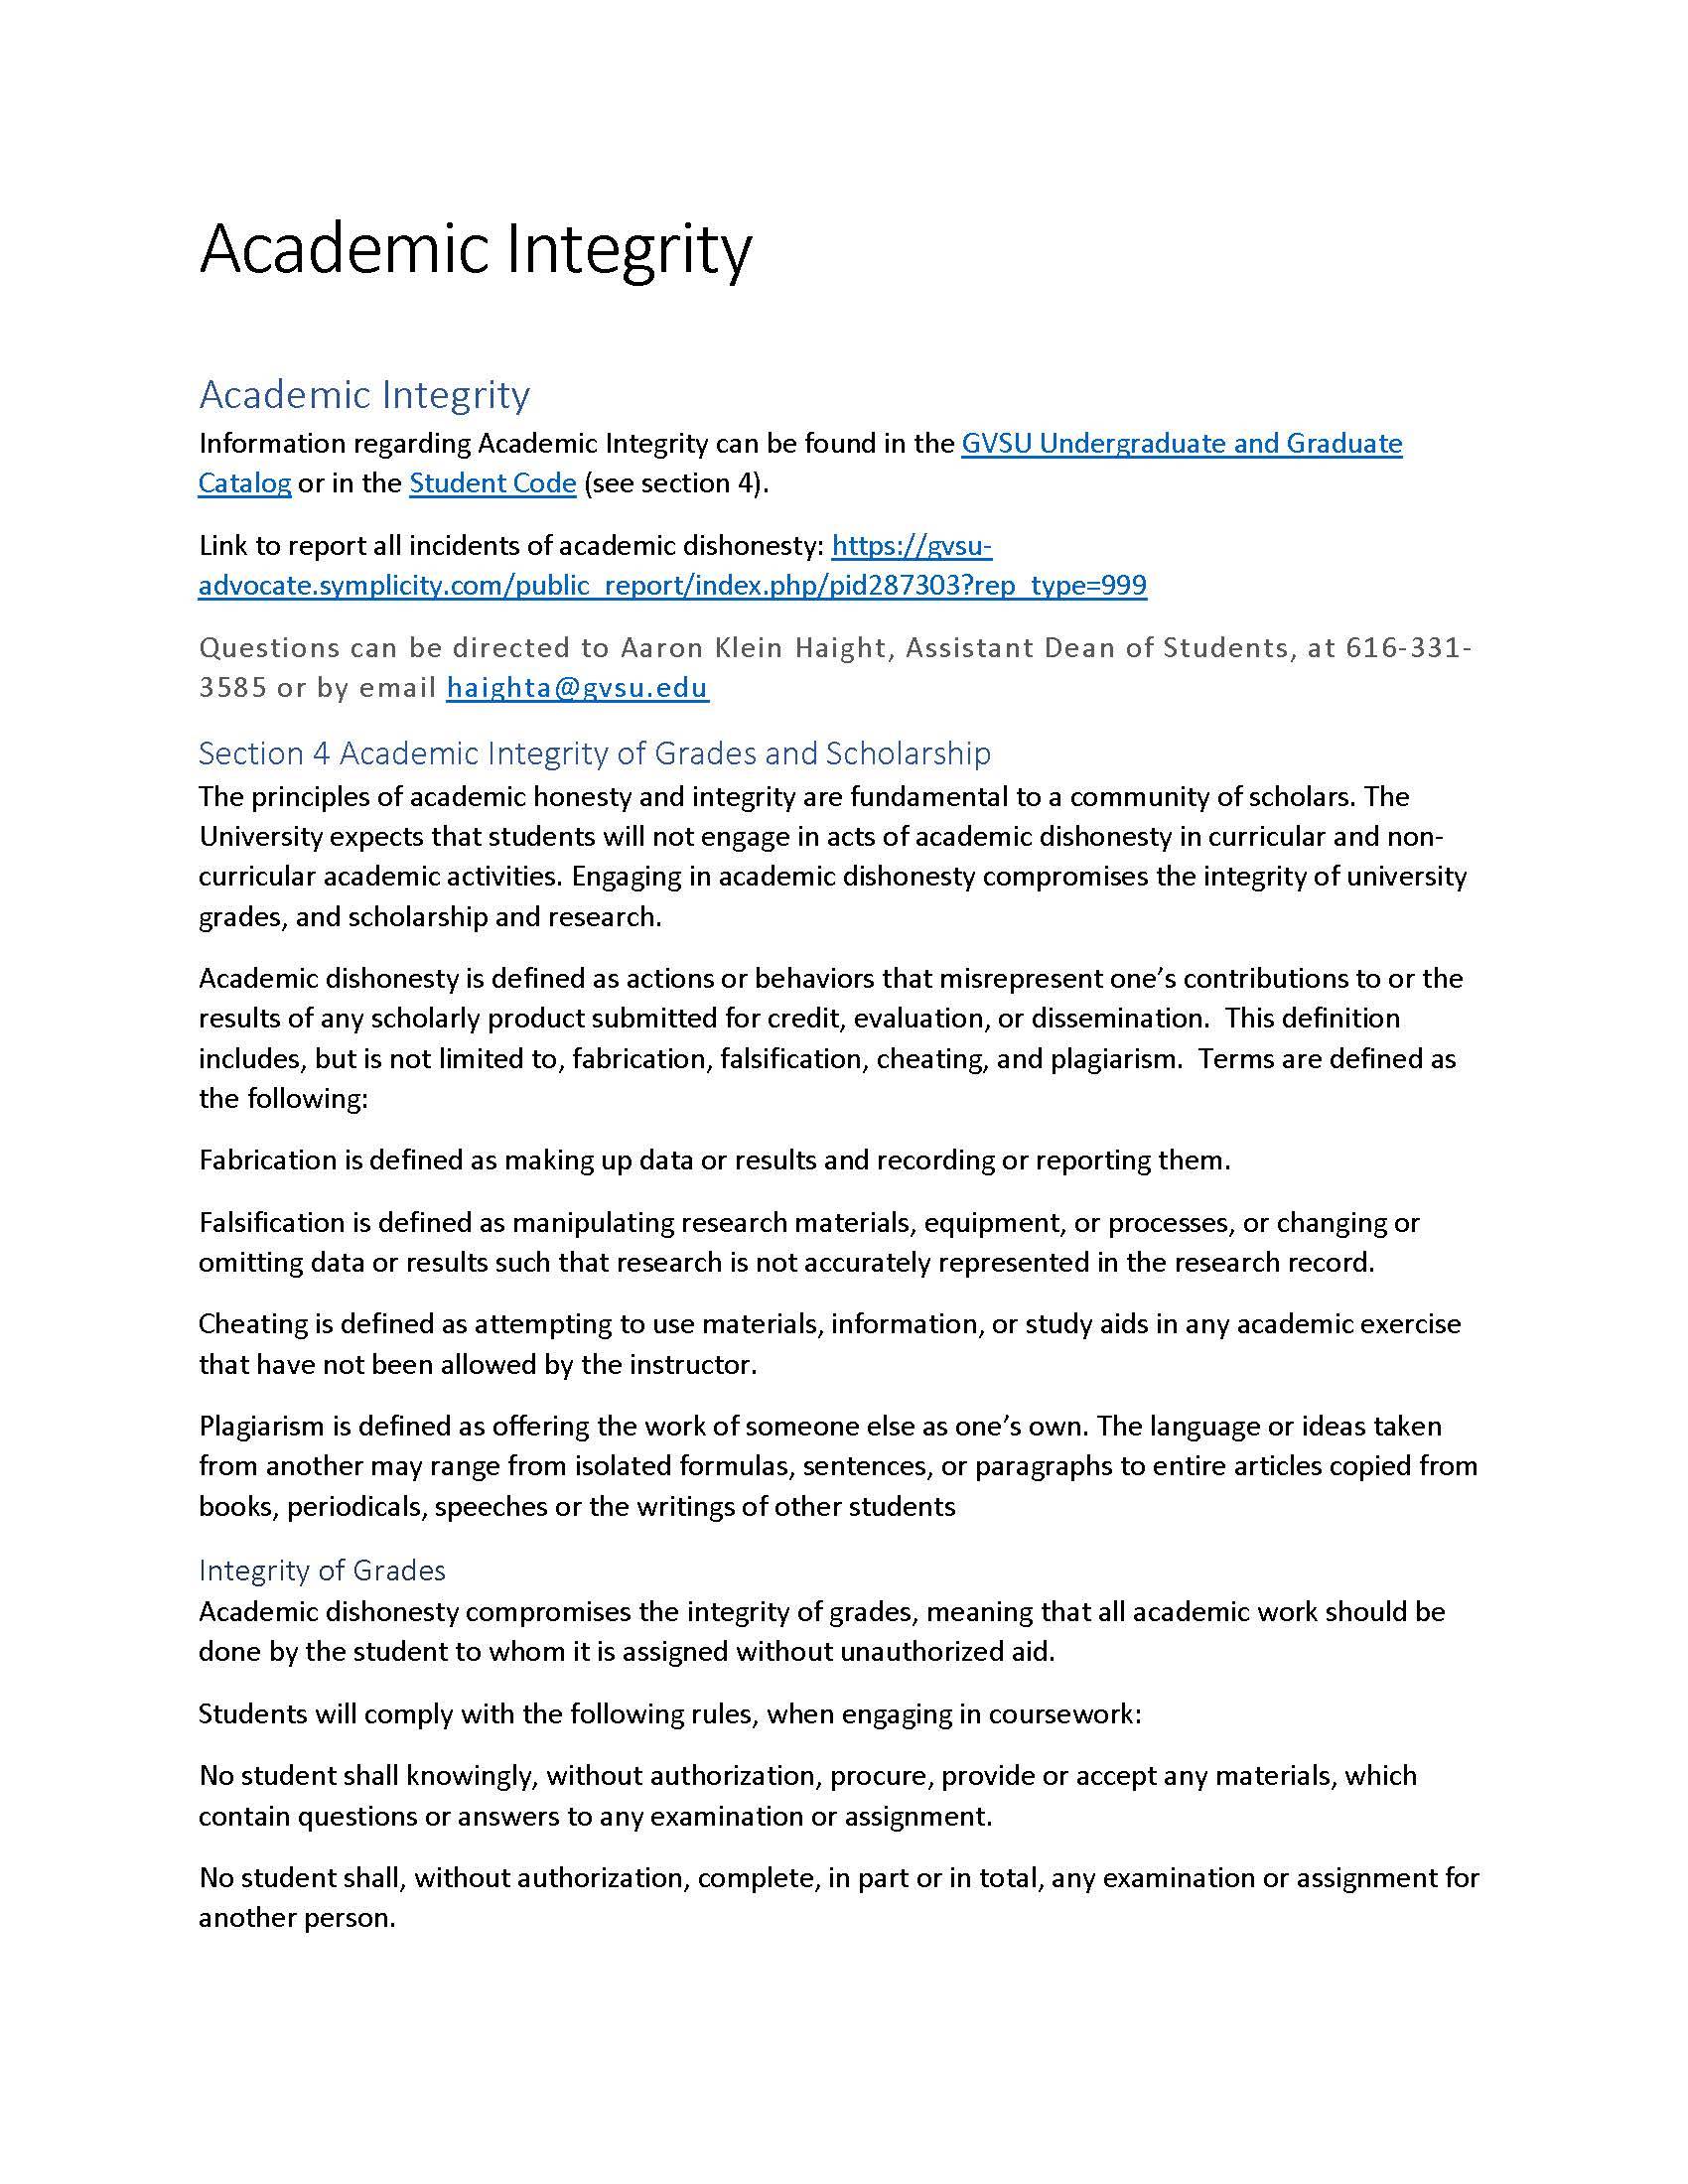 Accessible PDF version of the Academic Integrity handout for download